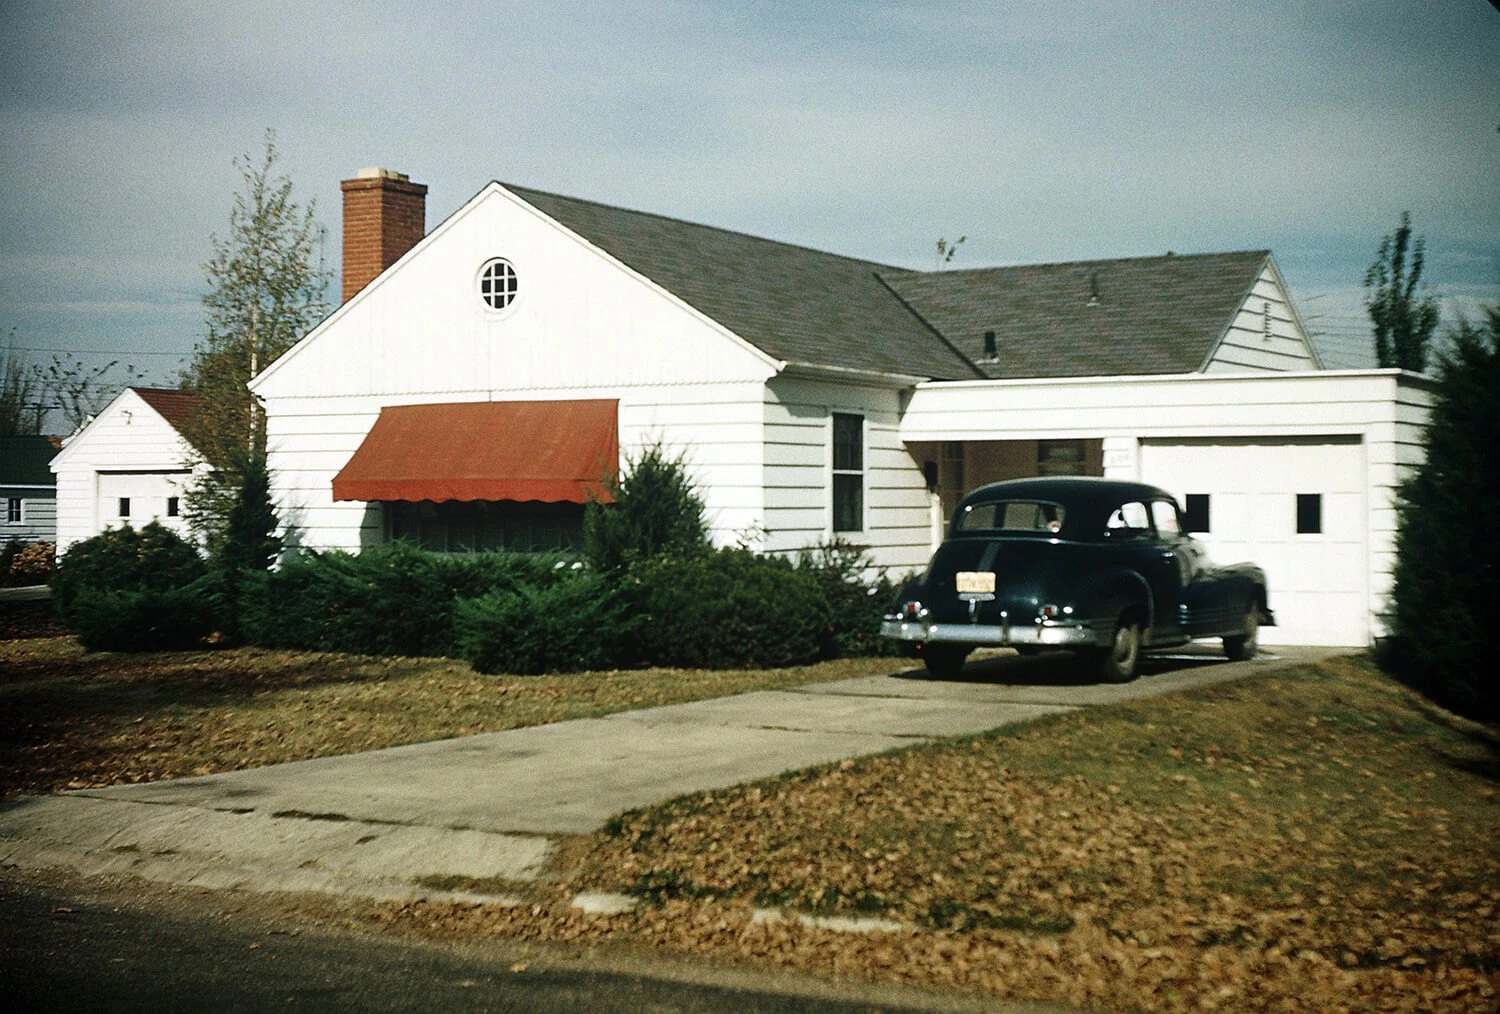 Color photo of a small white house with semi-detached garage and black 1940s-era car in the driveway.